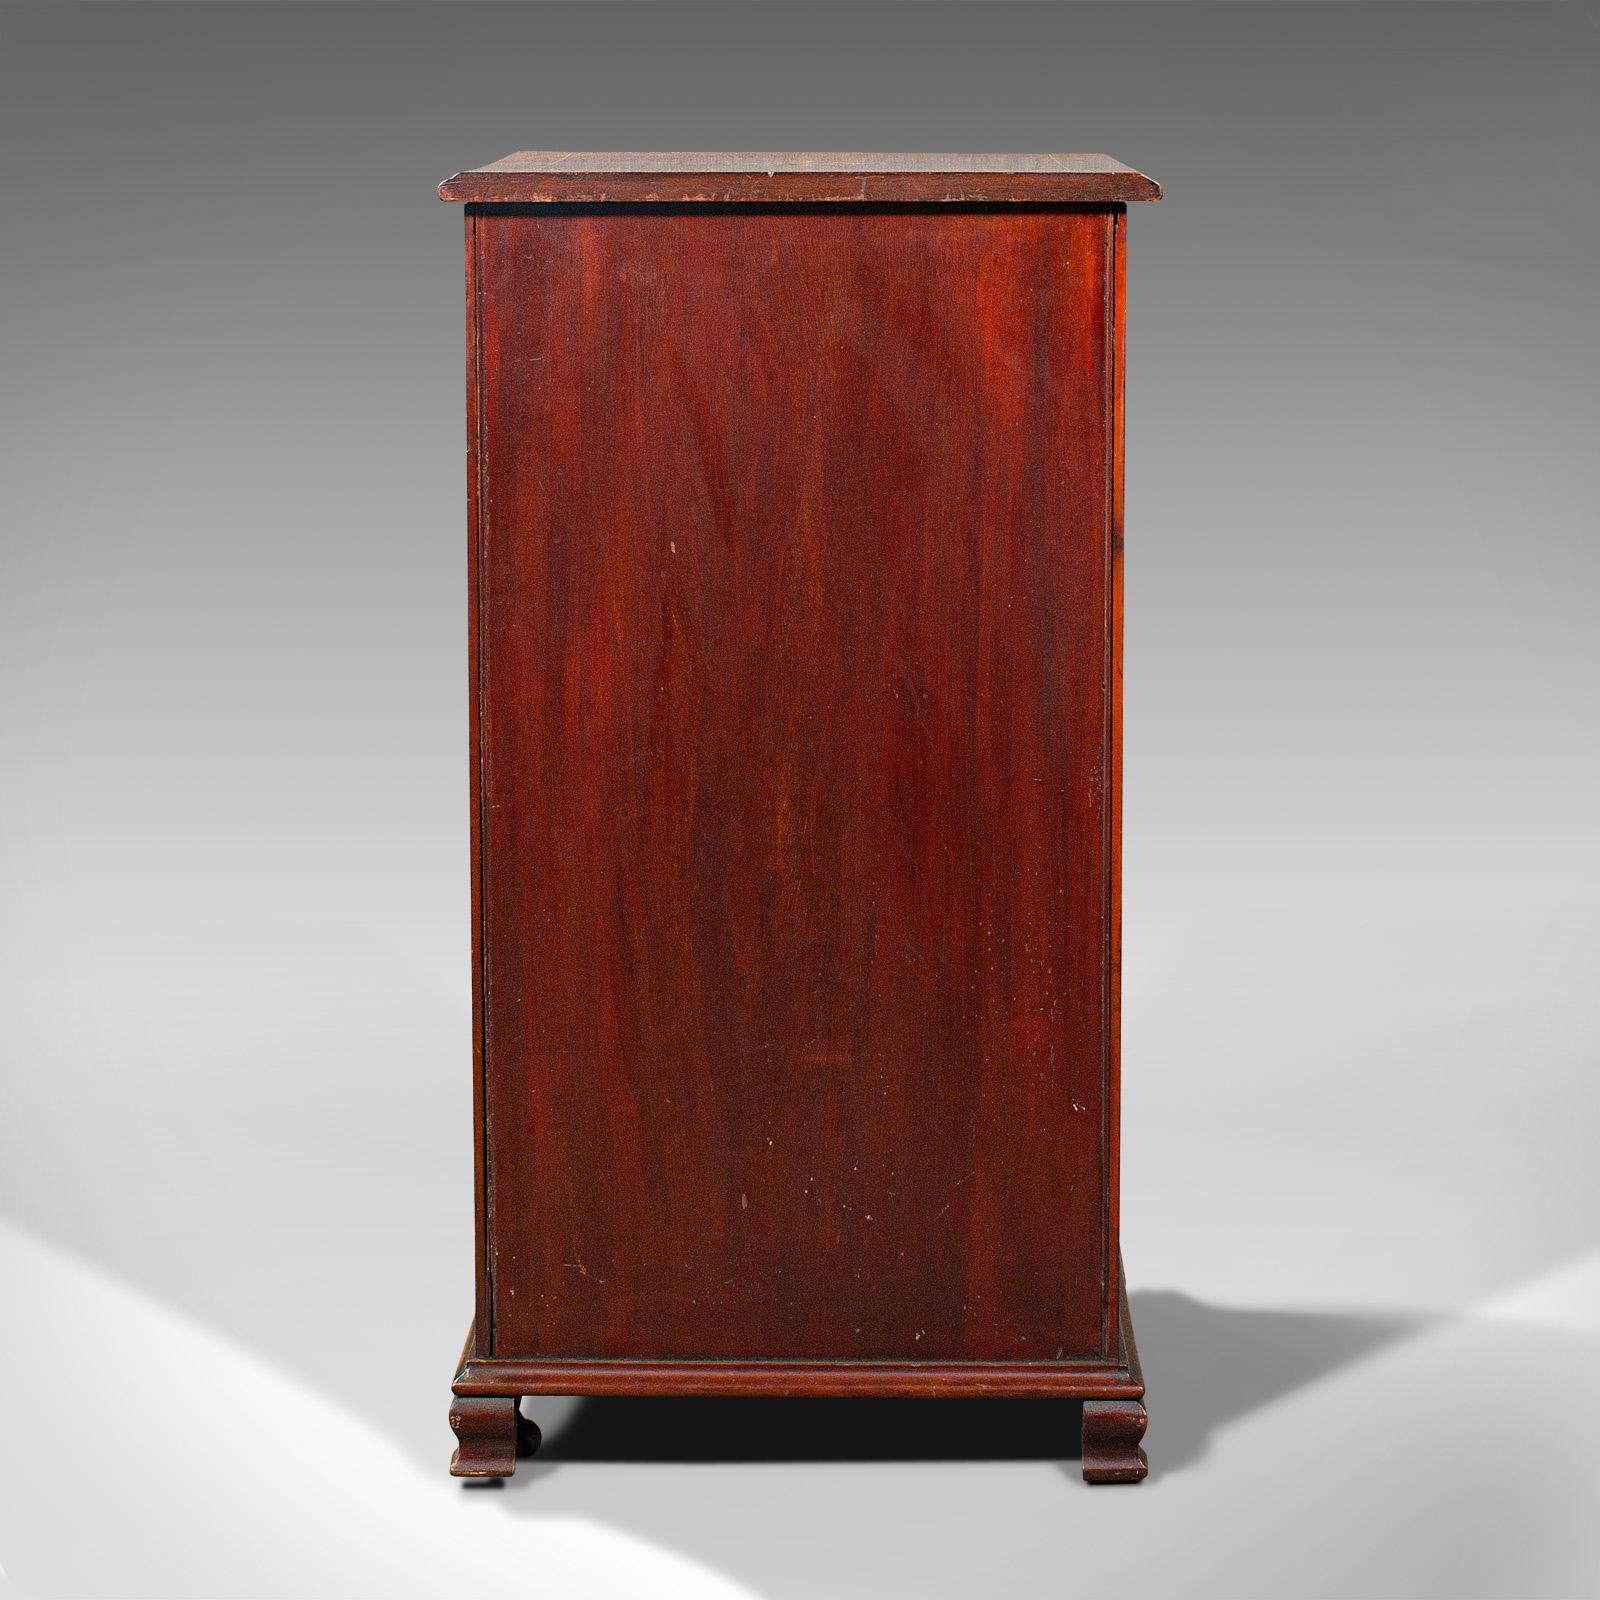 19th Century Antique Music Cabinet, English, Rosewood, Display Case, Inlay, Victorian, C.1870